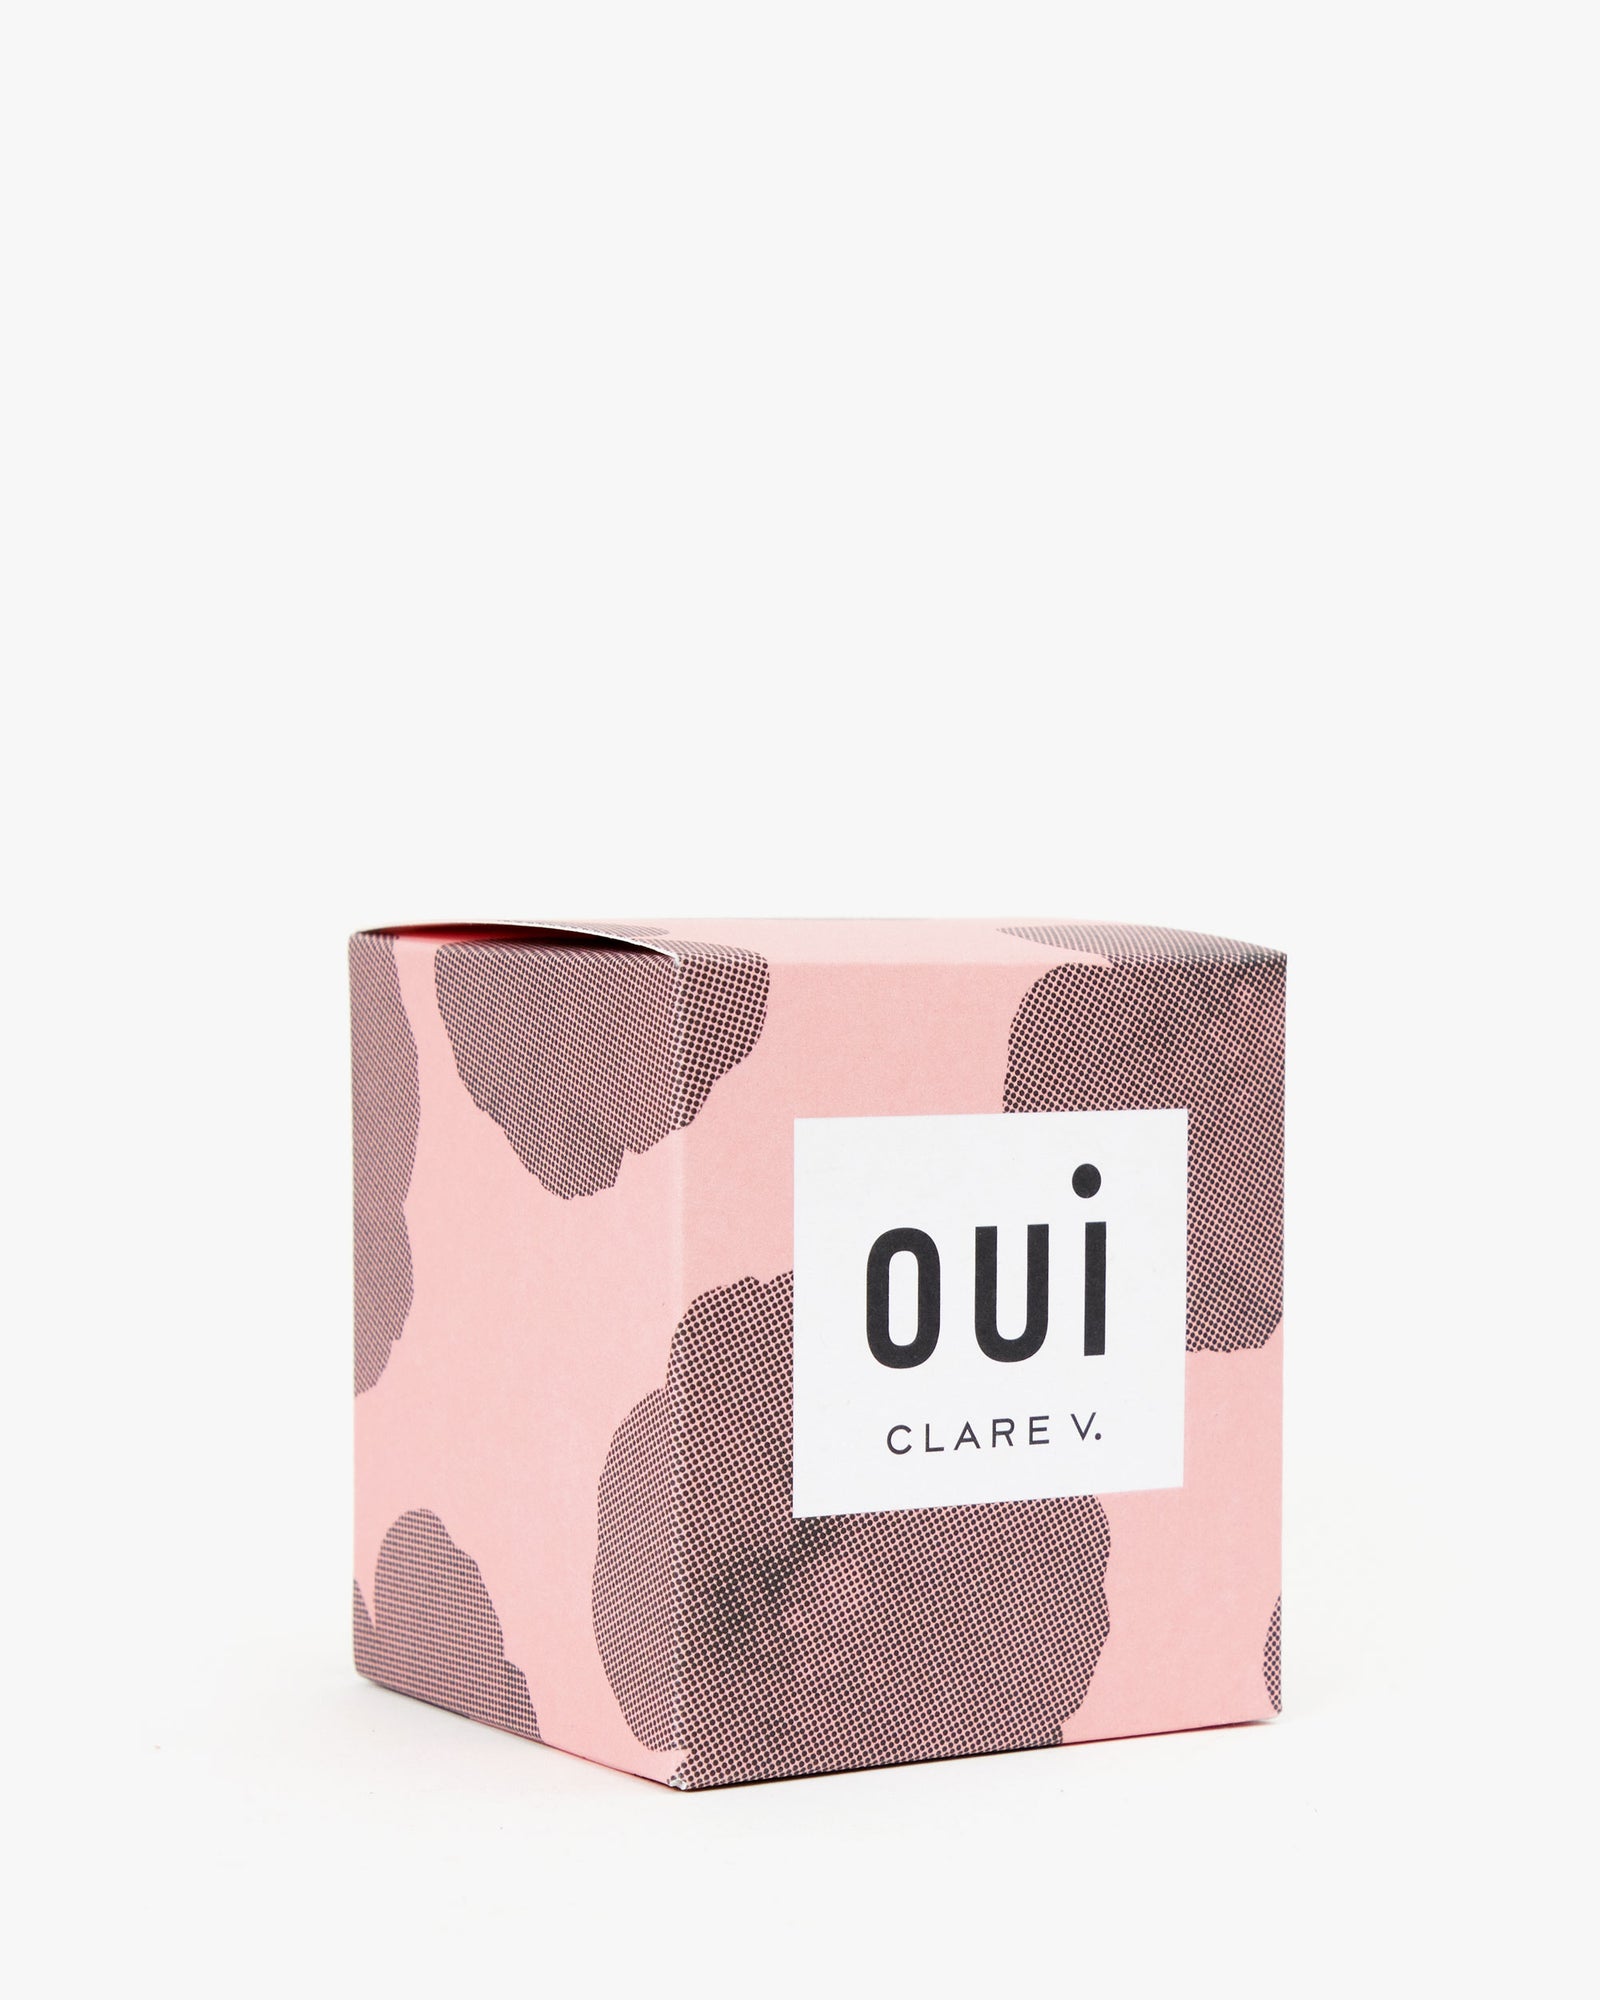 Clare V. Oui Candle in box